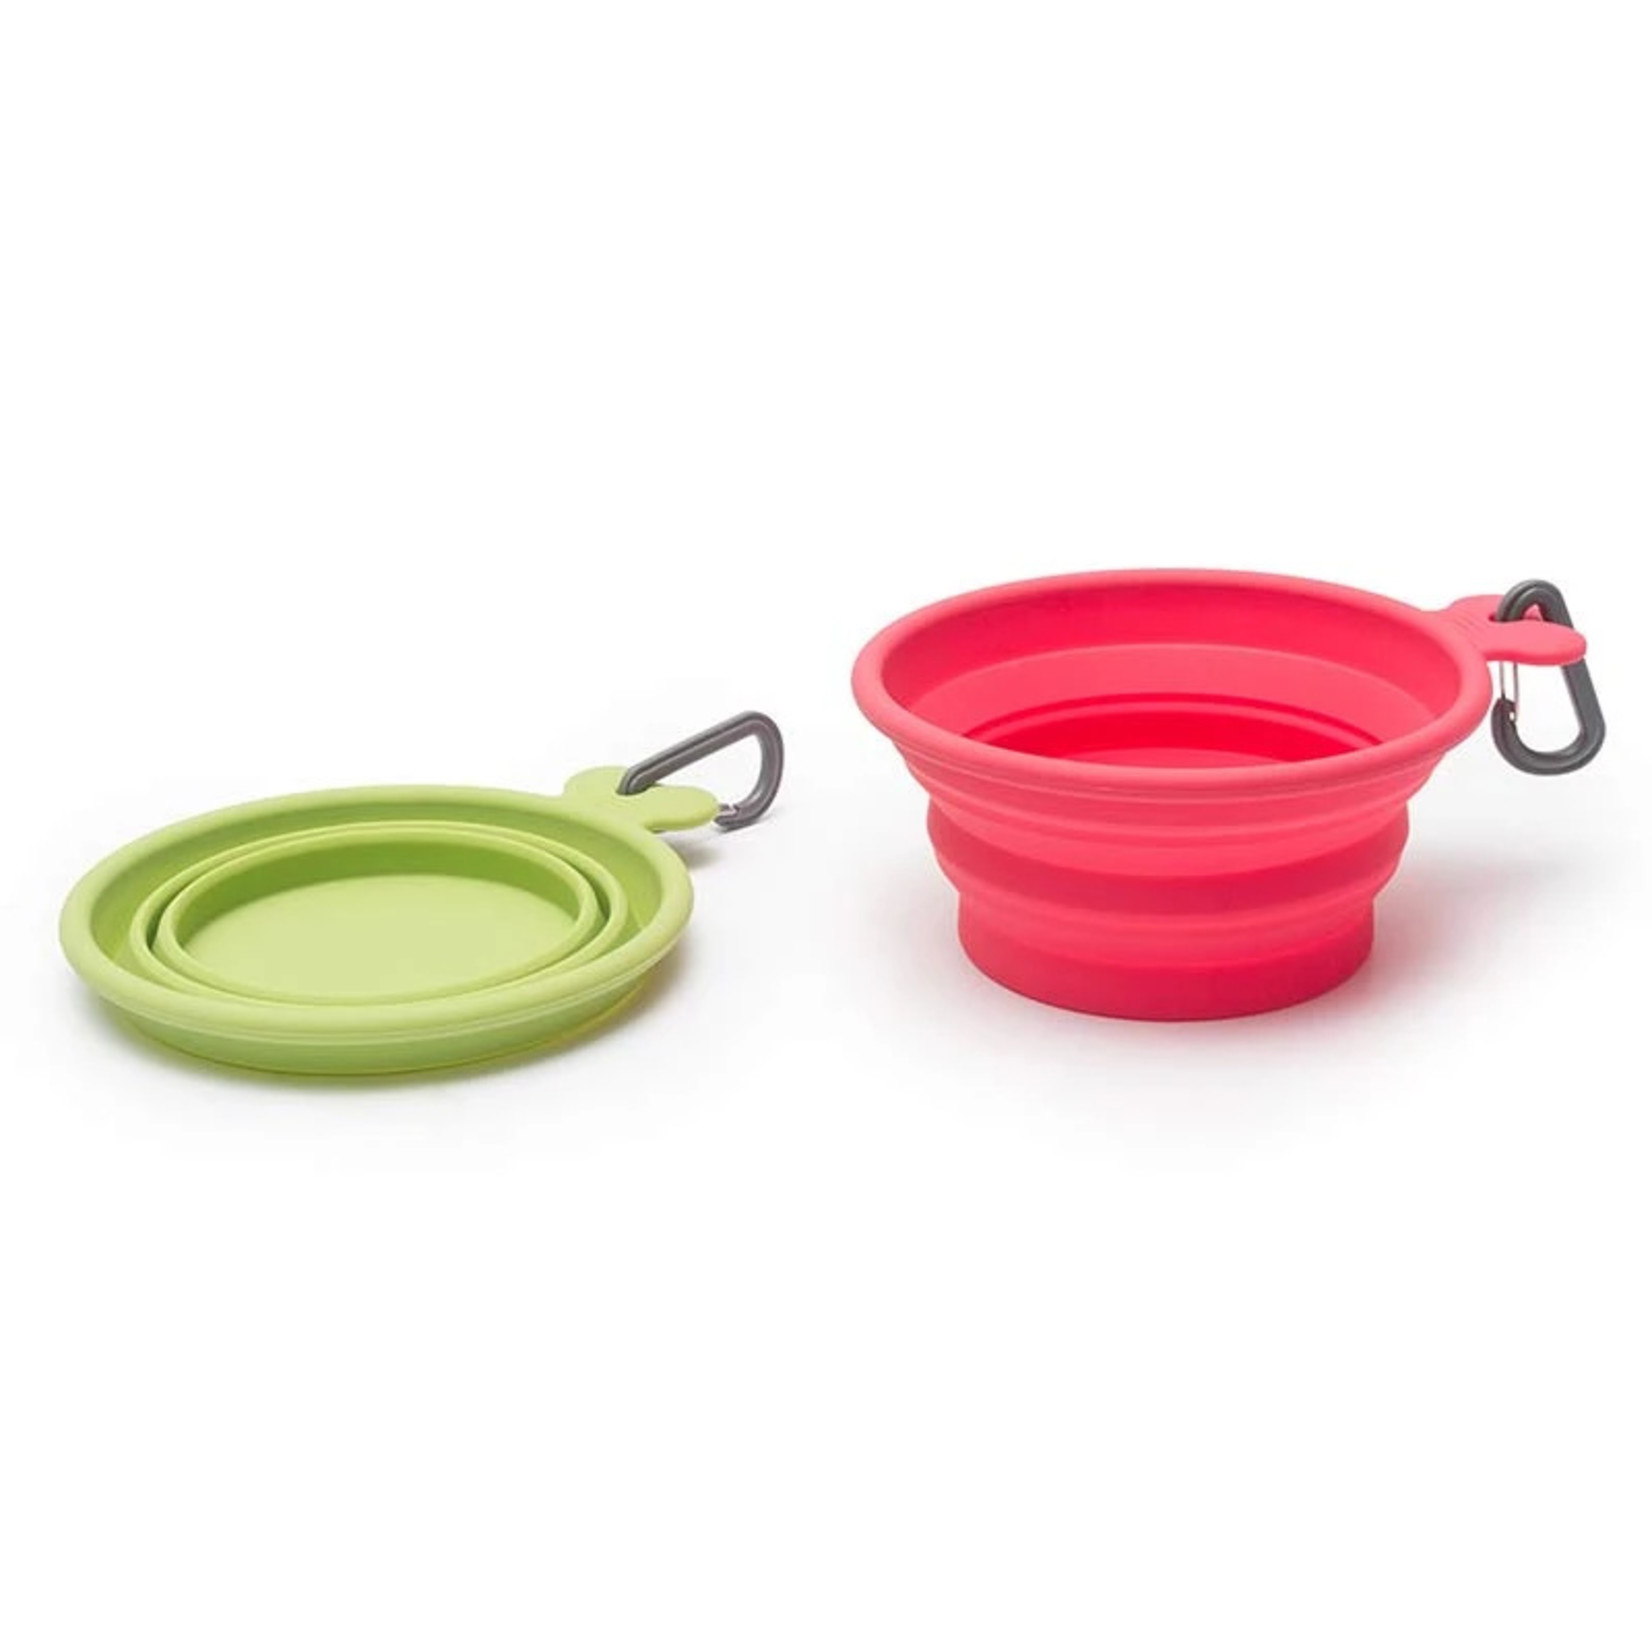 Messy Mutts Messy Mutts Collapsible Bowl